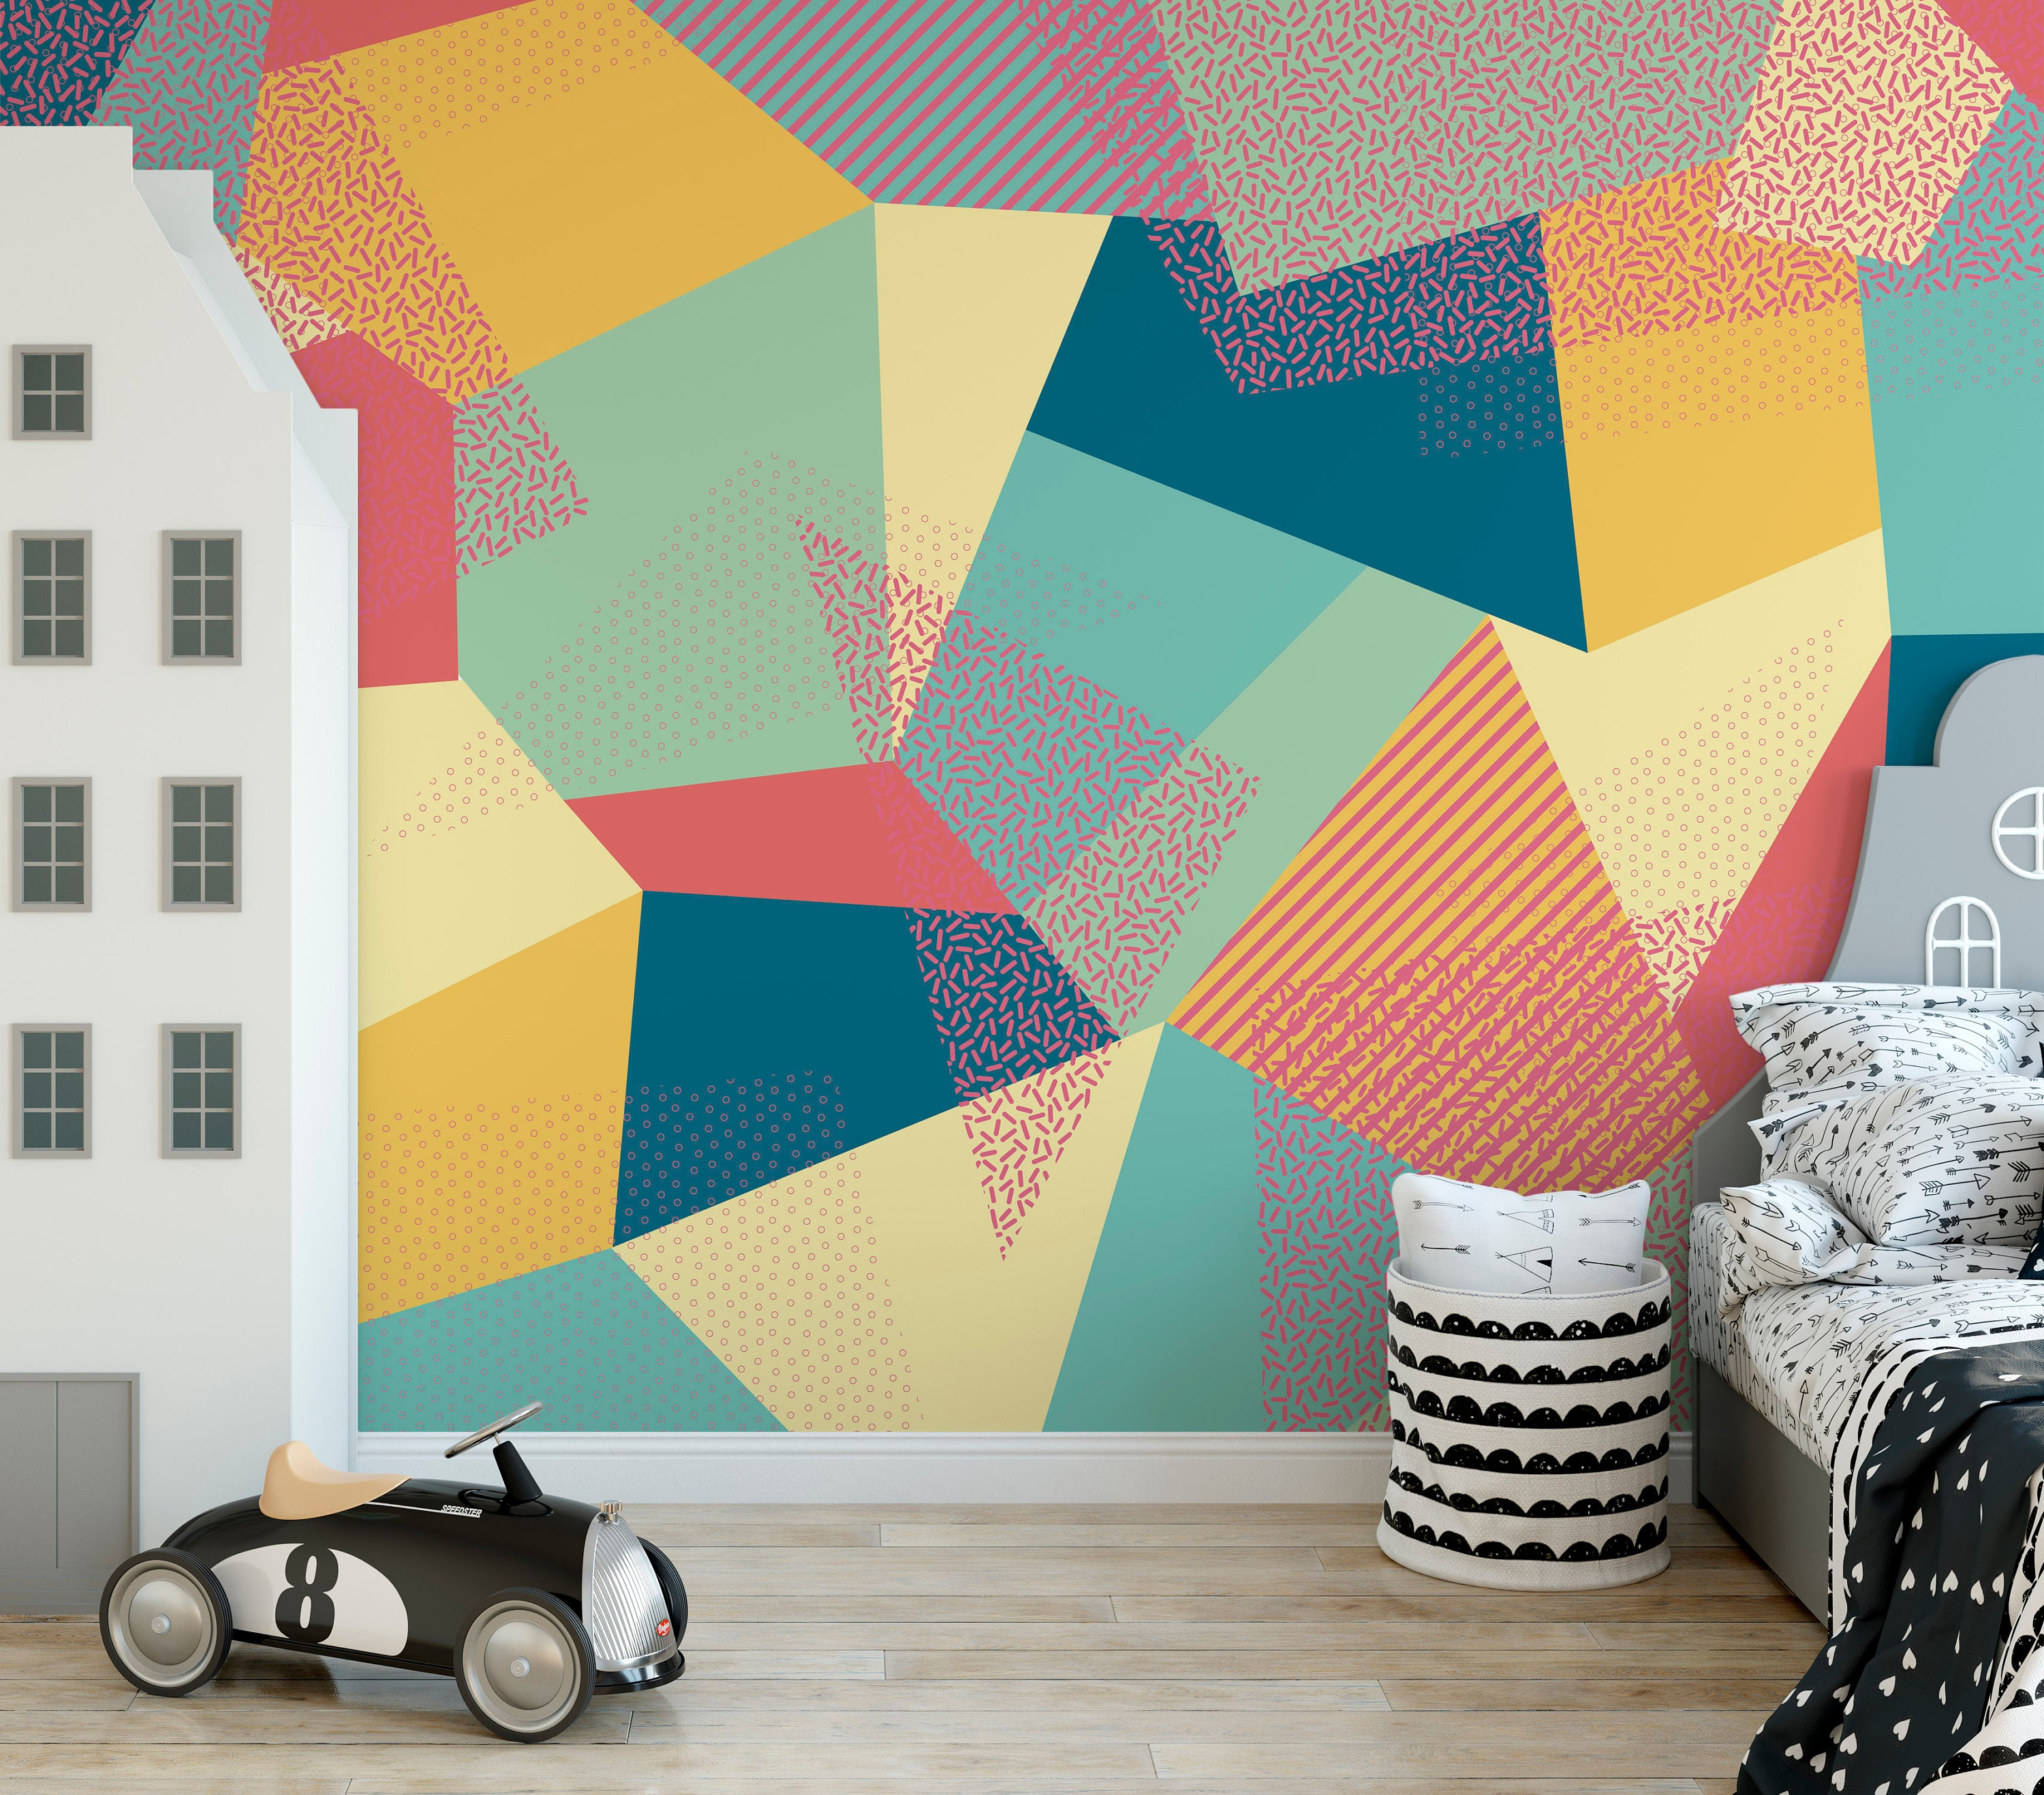 Abstract Triangles Colorful Geometric Shapes Wallpaper Self Adhesive Peel & Stick Wall Sticker Wall Decoration Scandinavian Design Removable